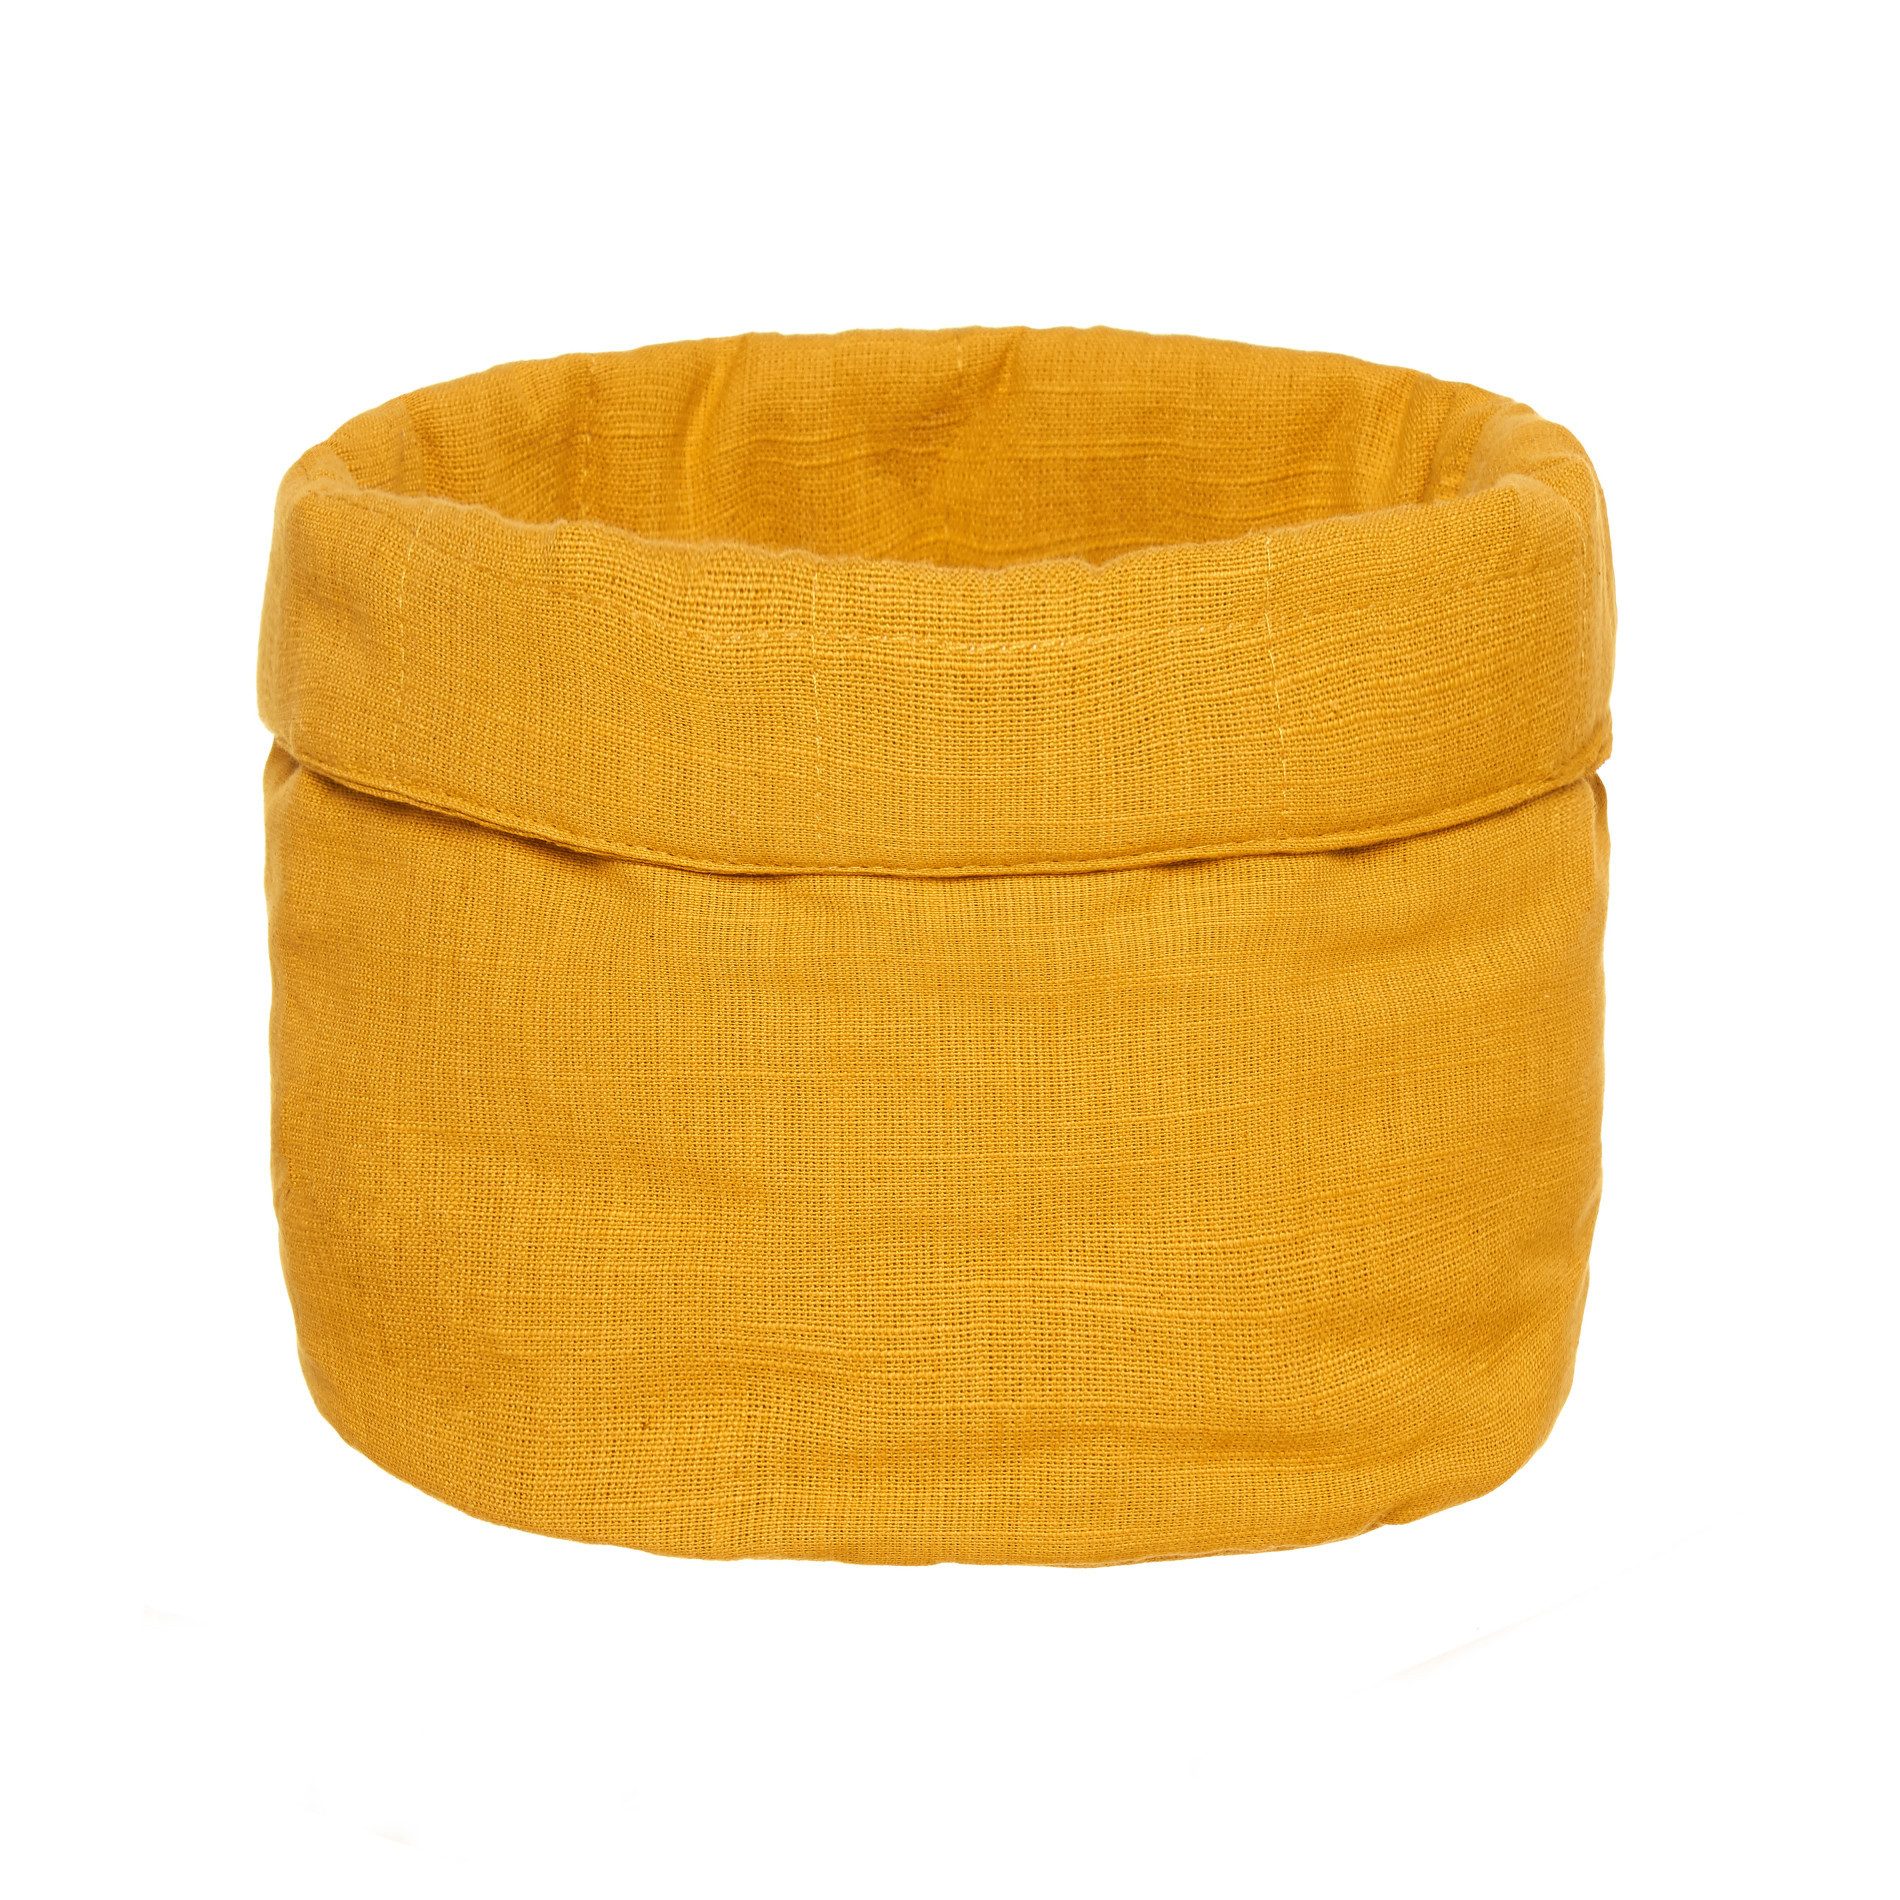 Round quilted mÃ©lange basket, Ocra Yellow, large image number 0